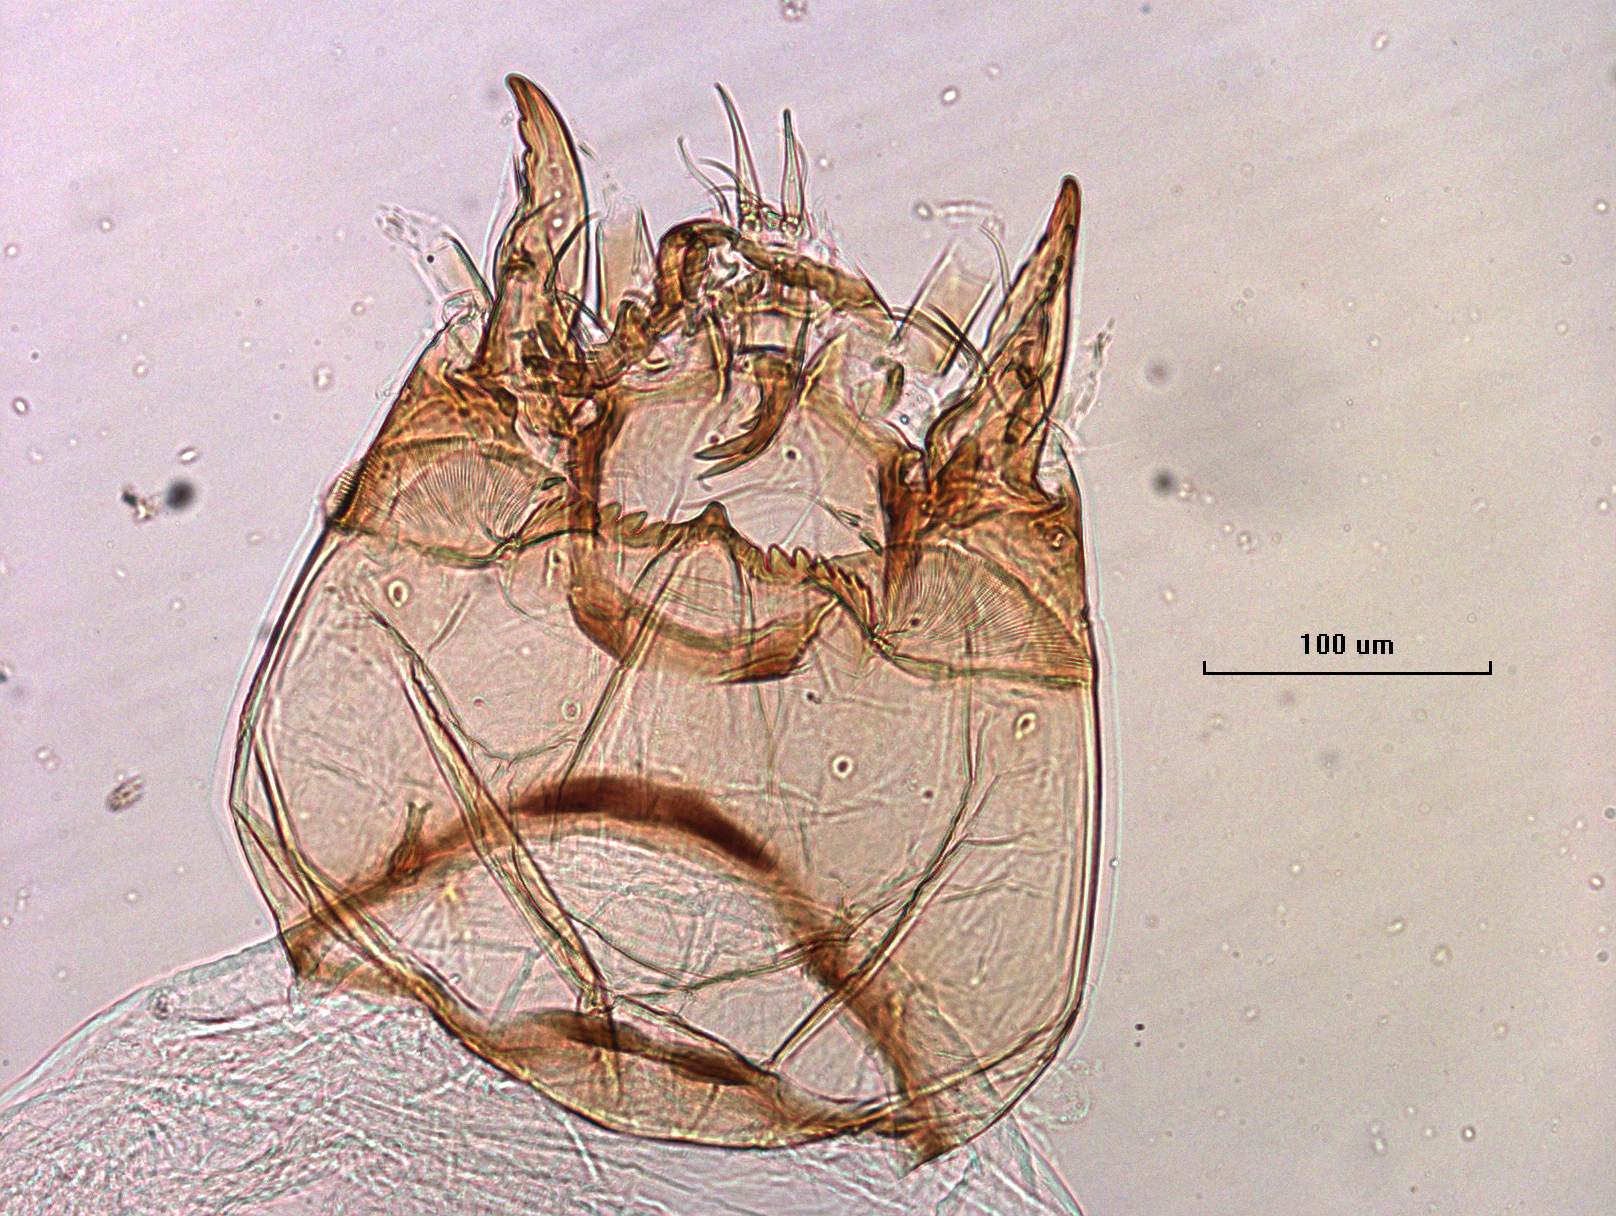 photomicrograph of the head capsule of a chironomid midge larva showing the mentum and ventromental plates